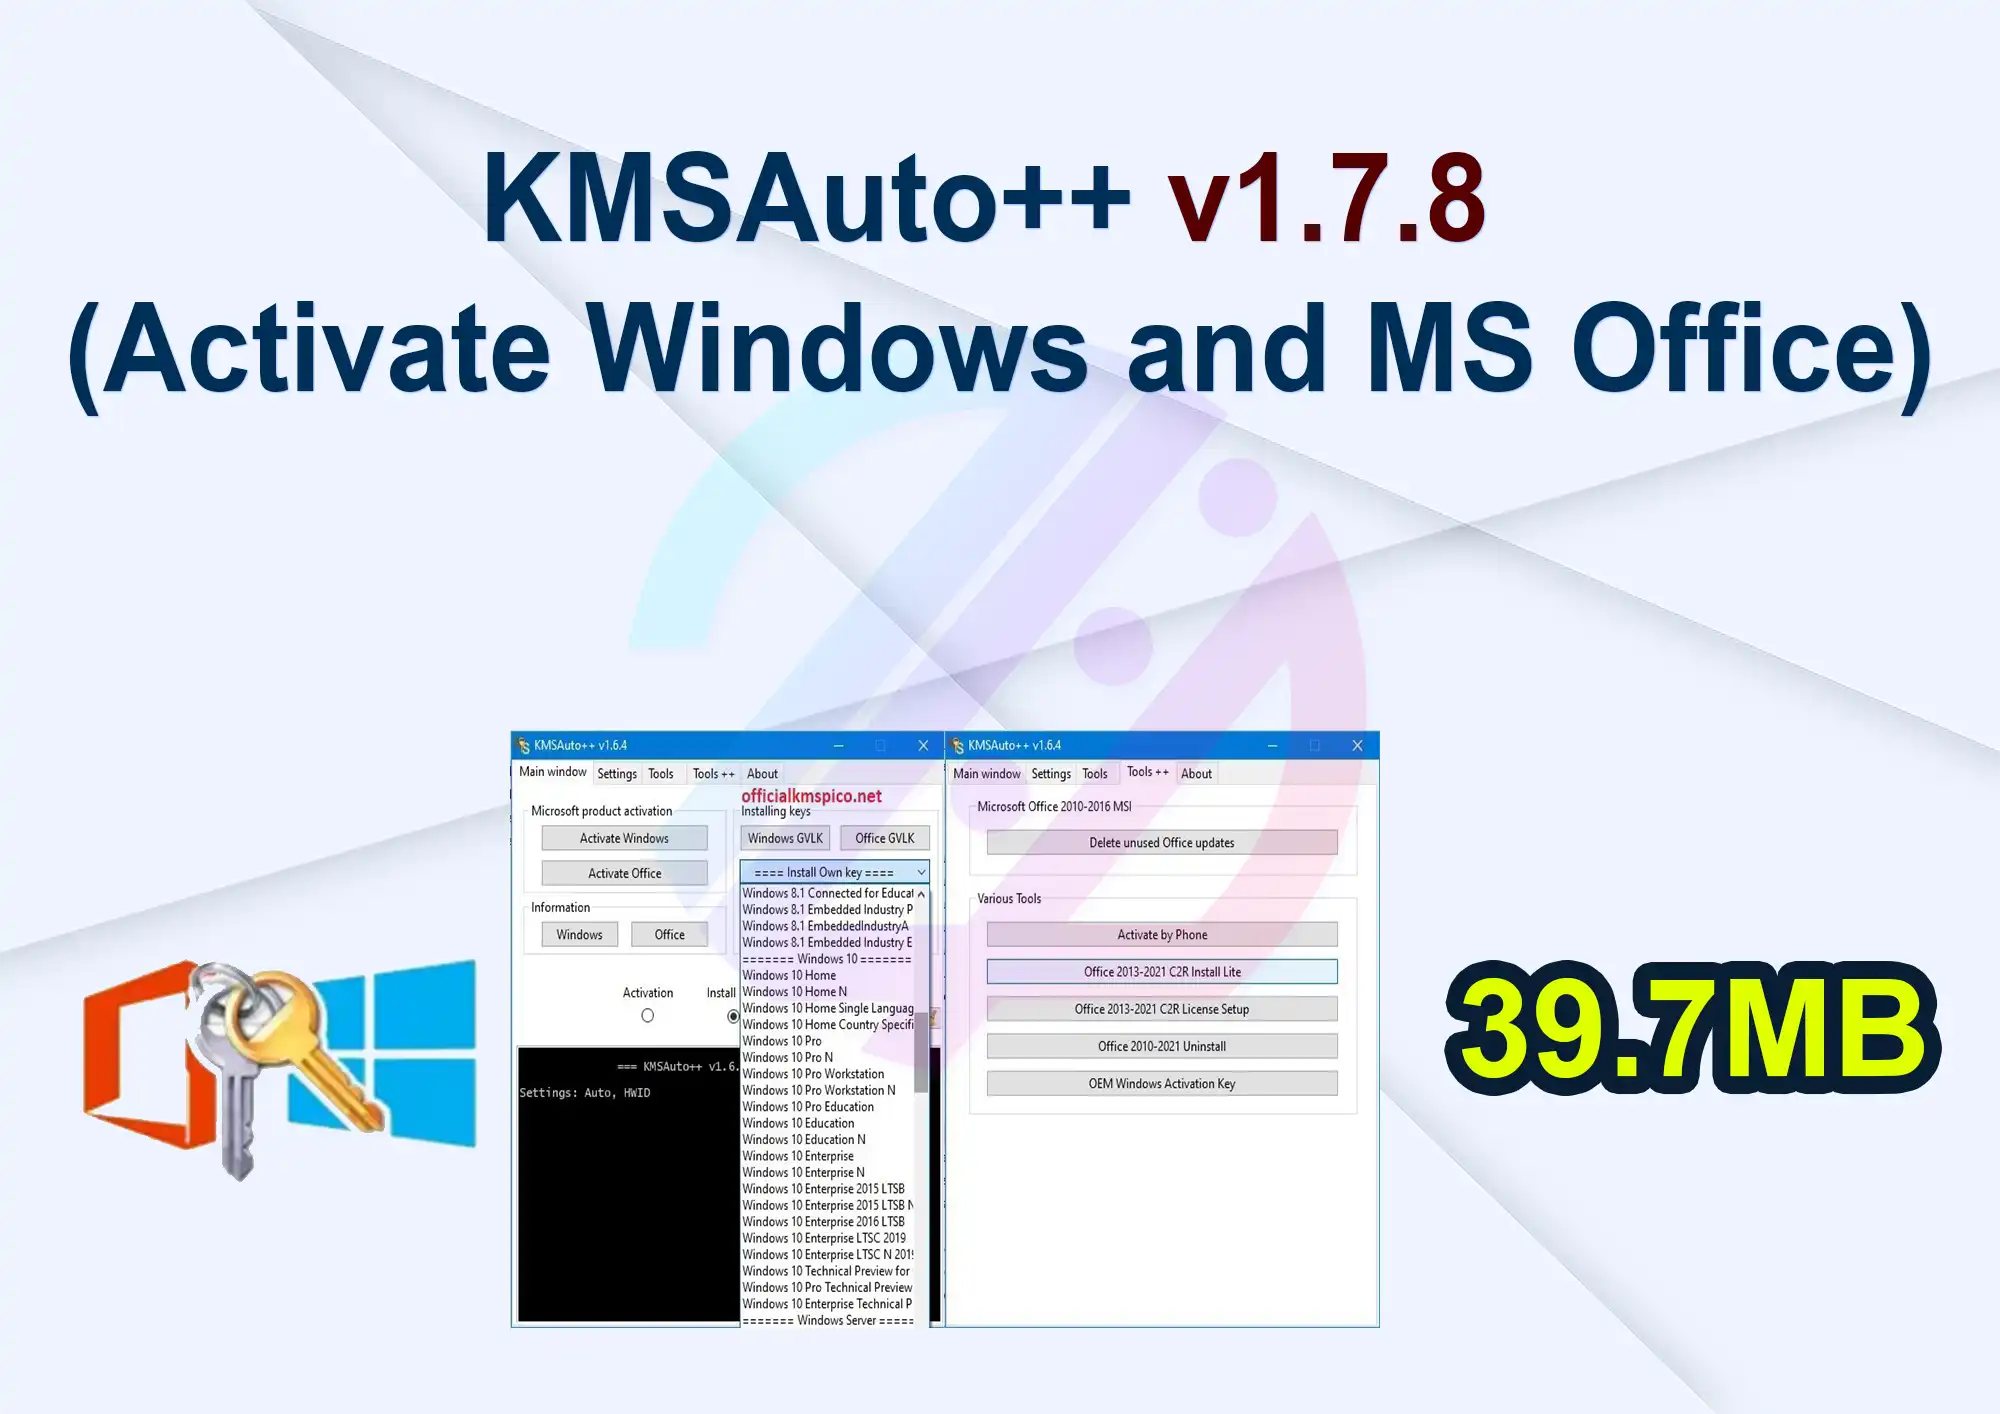 KMSAuto++ v1.7.8 (Activate Windows and MS Office)